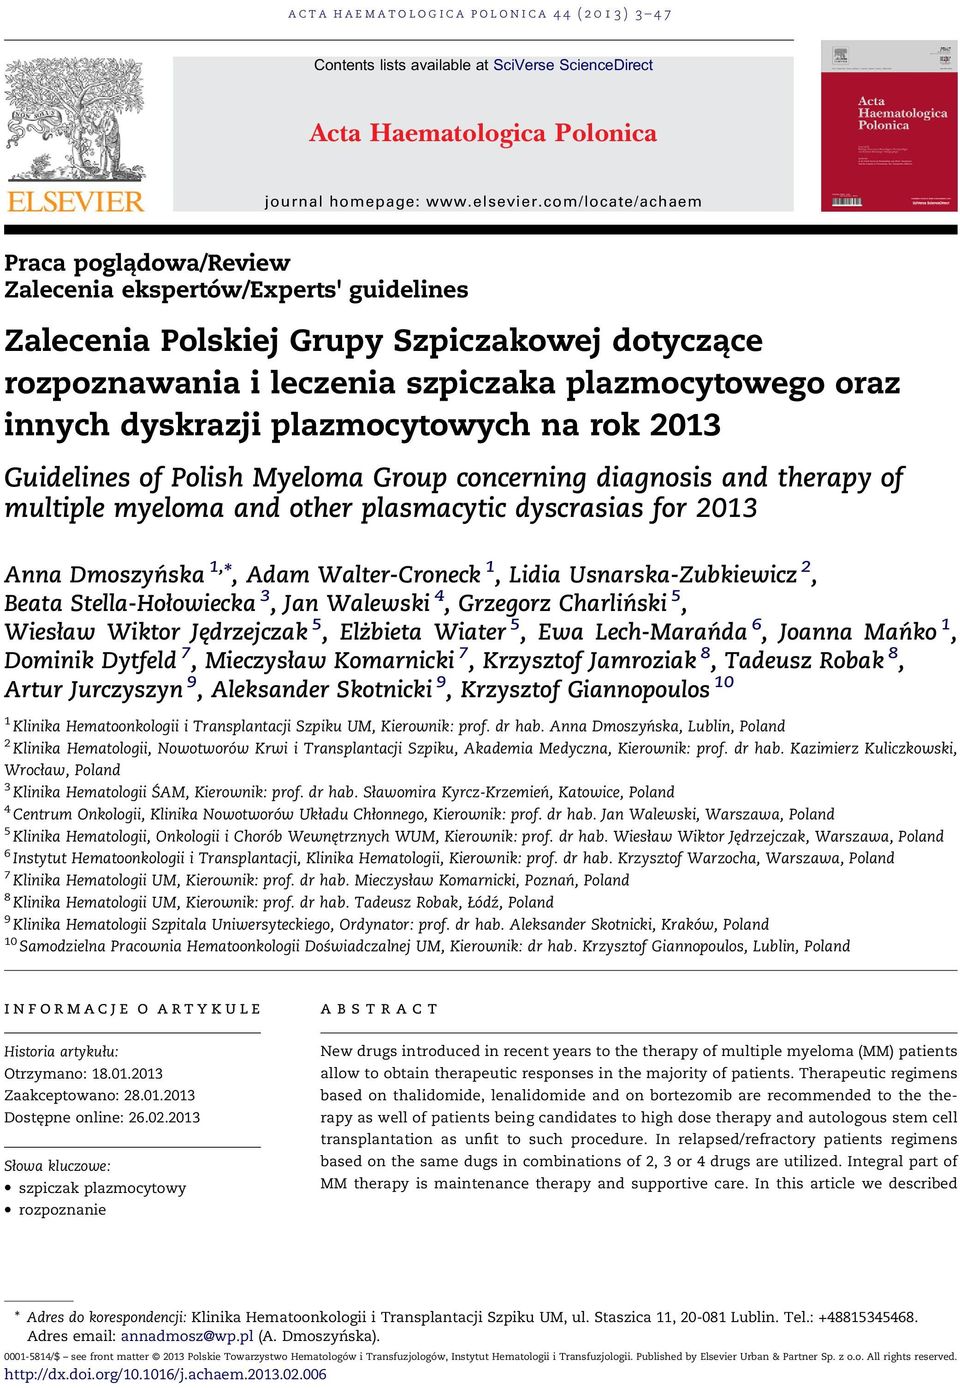 dyskrazji plazmocytowych na rok 2013 Guidelines of Polish Myeloma Group concerning diagnosis and therapy of multiple myeloma and other plasmacytic dyscrasias for 2013 Anna Dmoszyńska 1, *, Adam